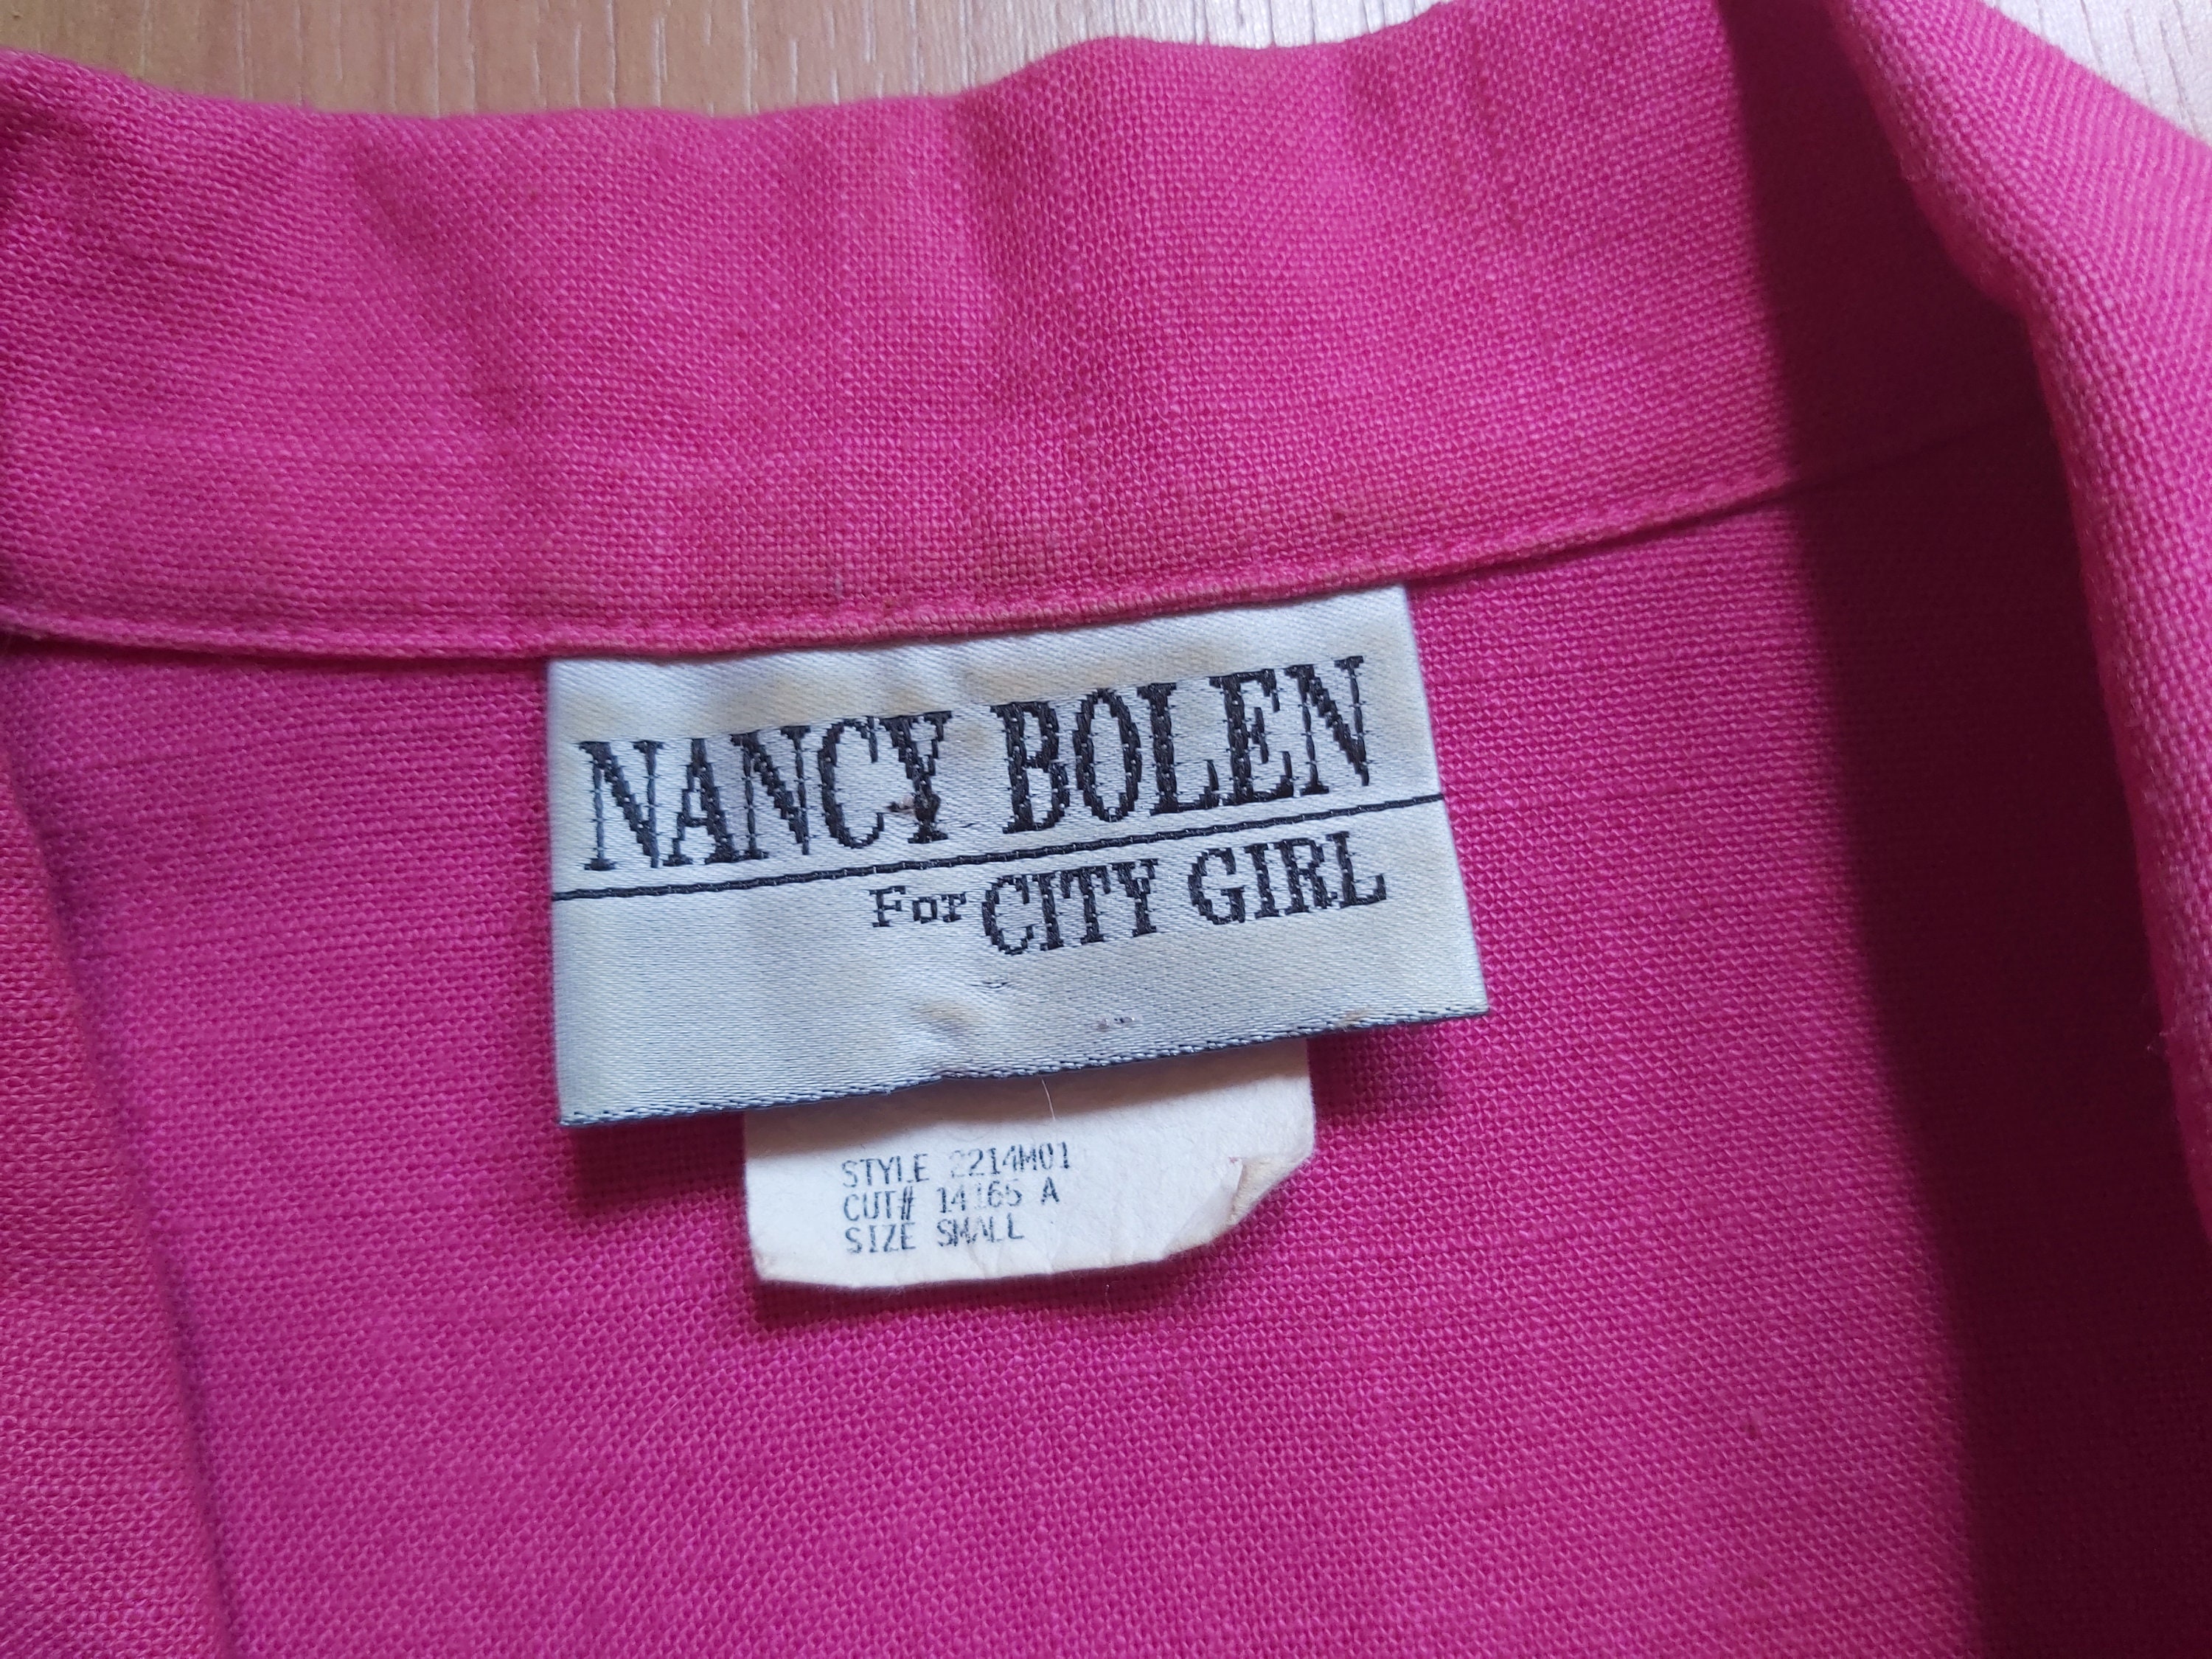 Vintage 1980s Nancy Bolen for City Girl Women's Applique Blazer Pink Short  Sleeved Collared Jacket Fancy Buttons Size S Made in USA -  New Zealand